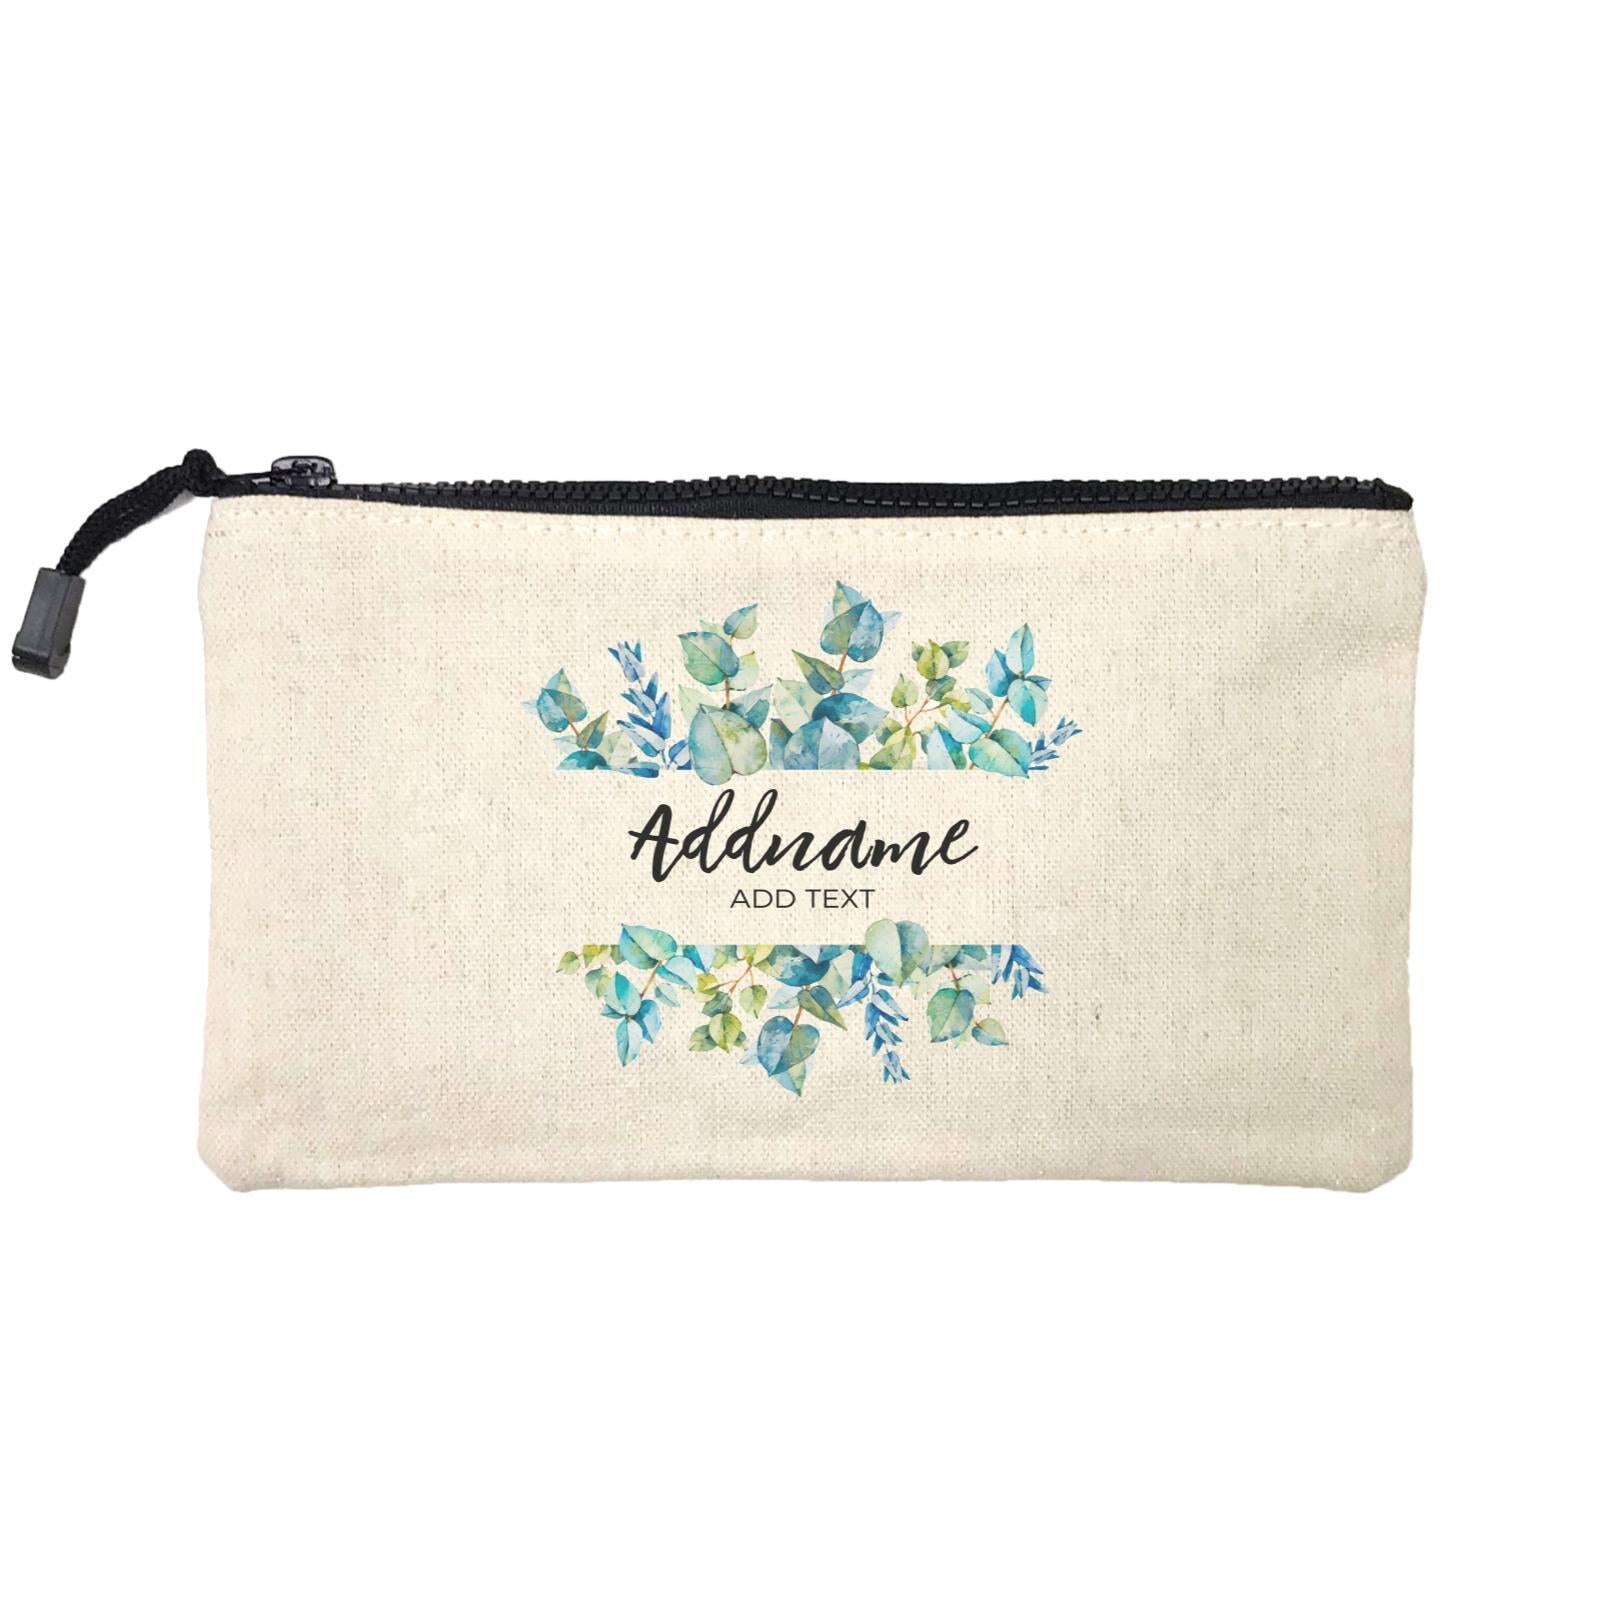 Add Your Own Text Teacher Blue Leaves Box Addname And Add Text Mini Accessories Stationery Pouch